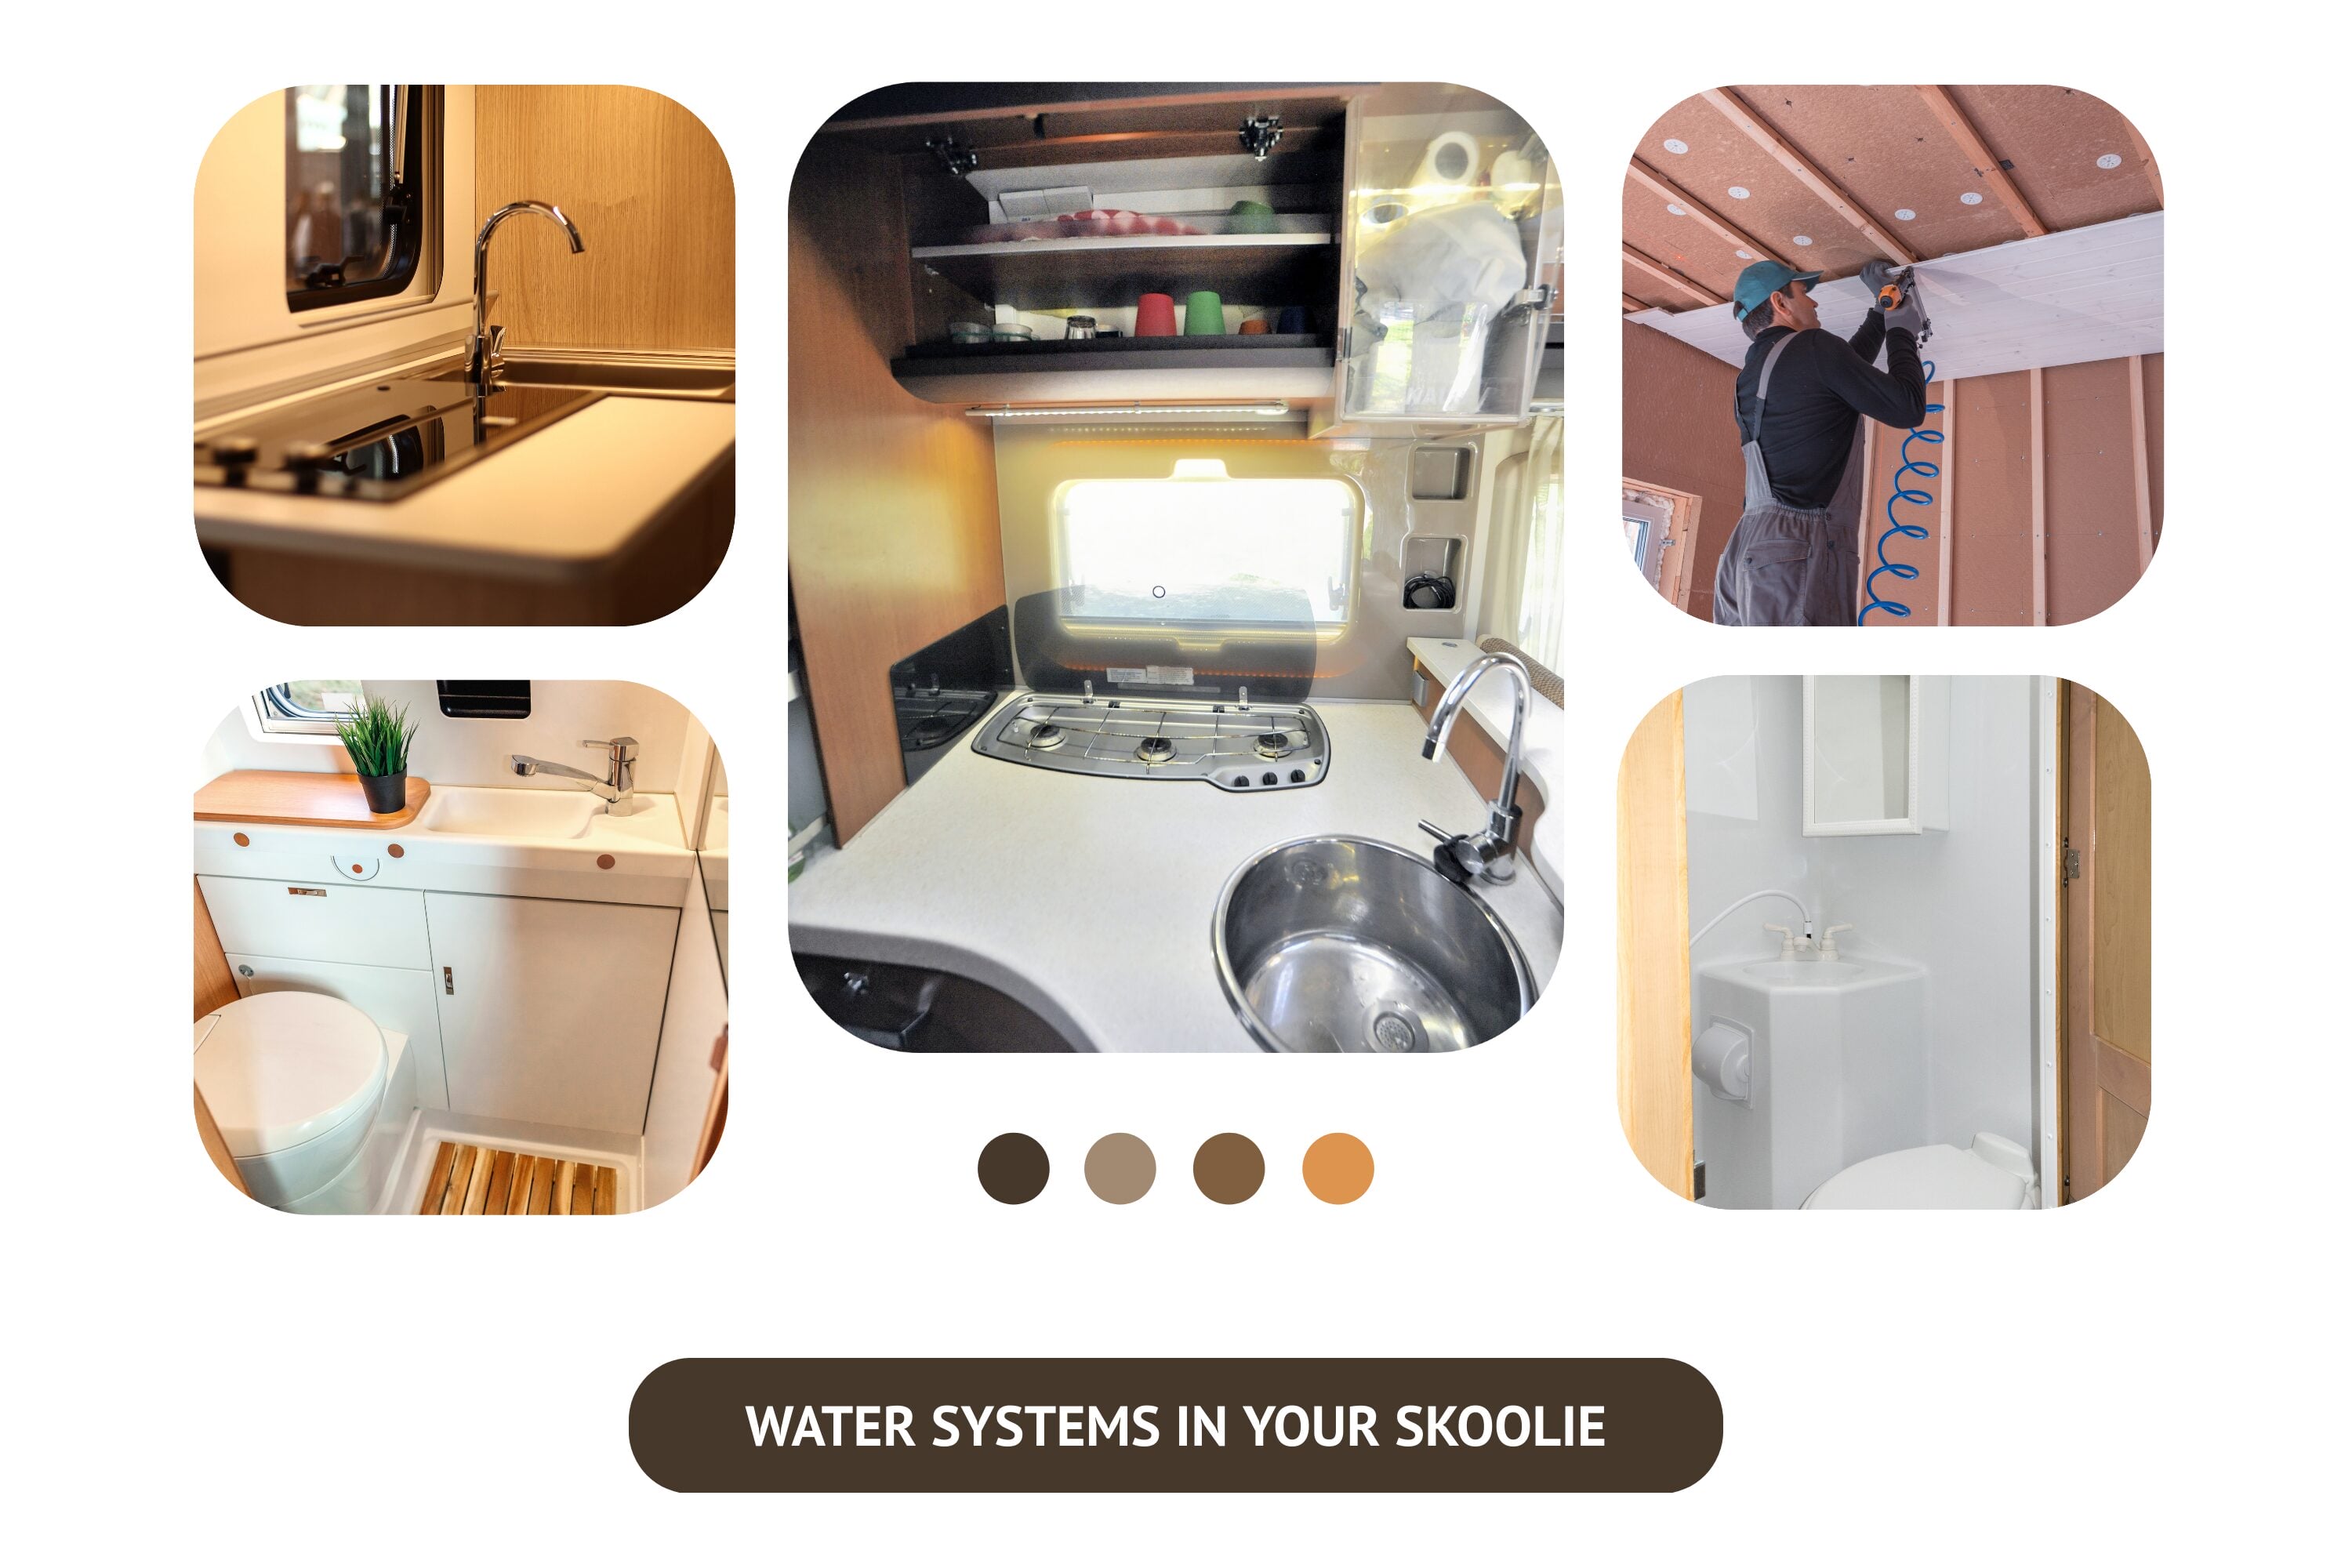 The Water System in Your Skoolie